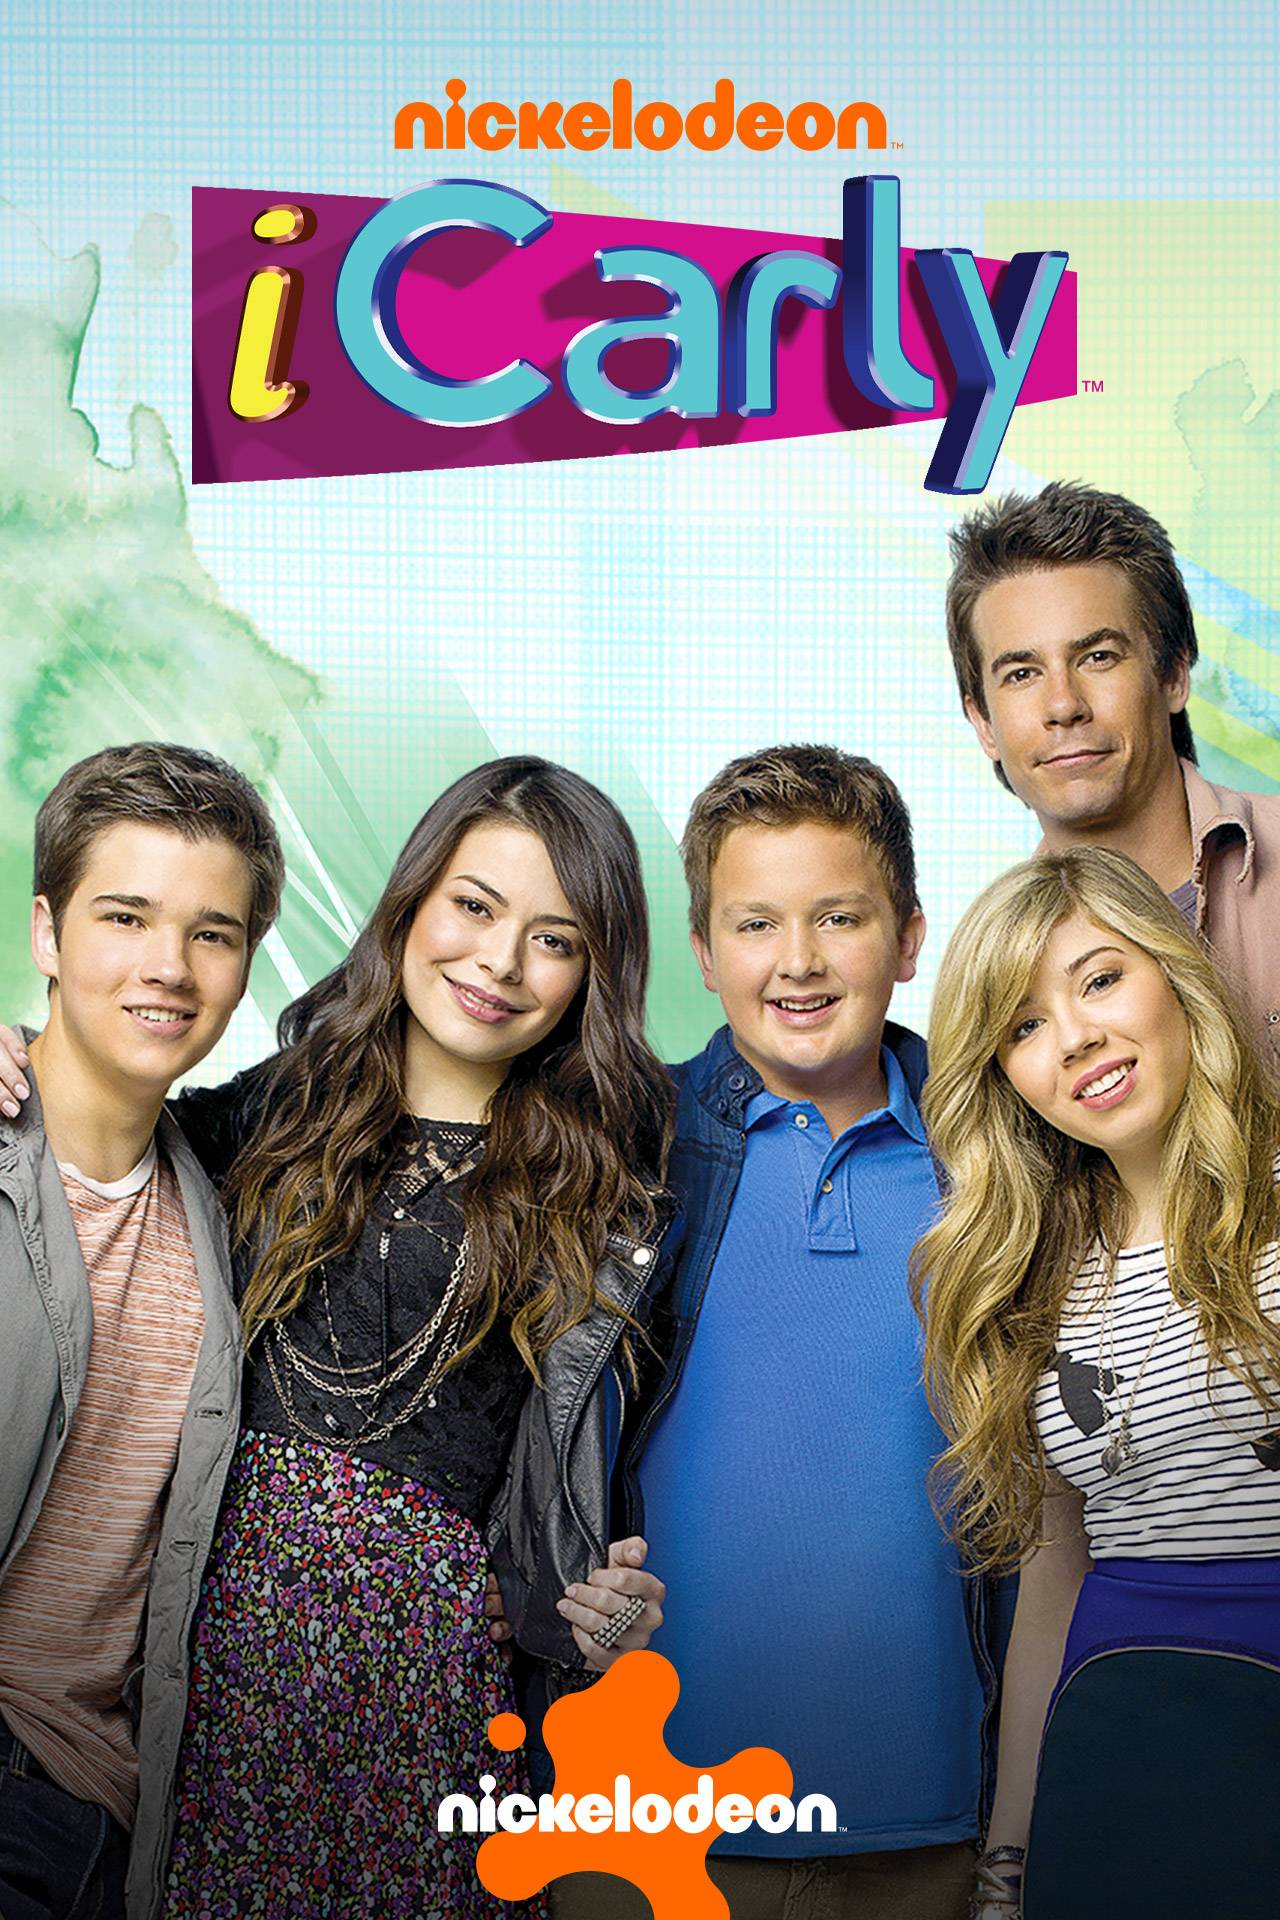 iCarly' streaming revival will feature original stars